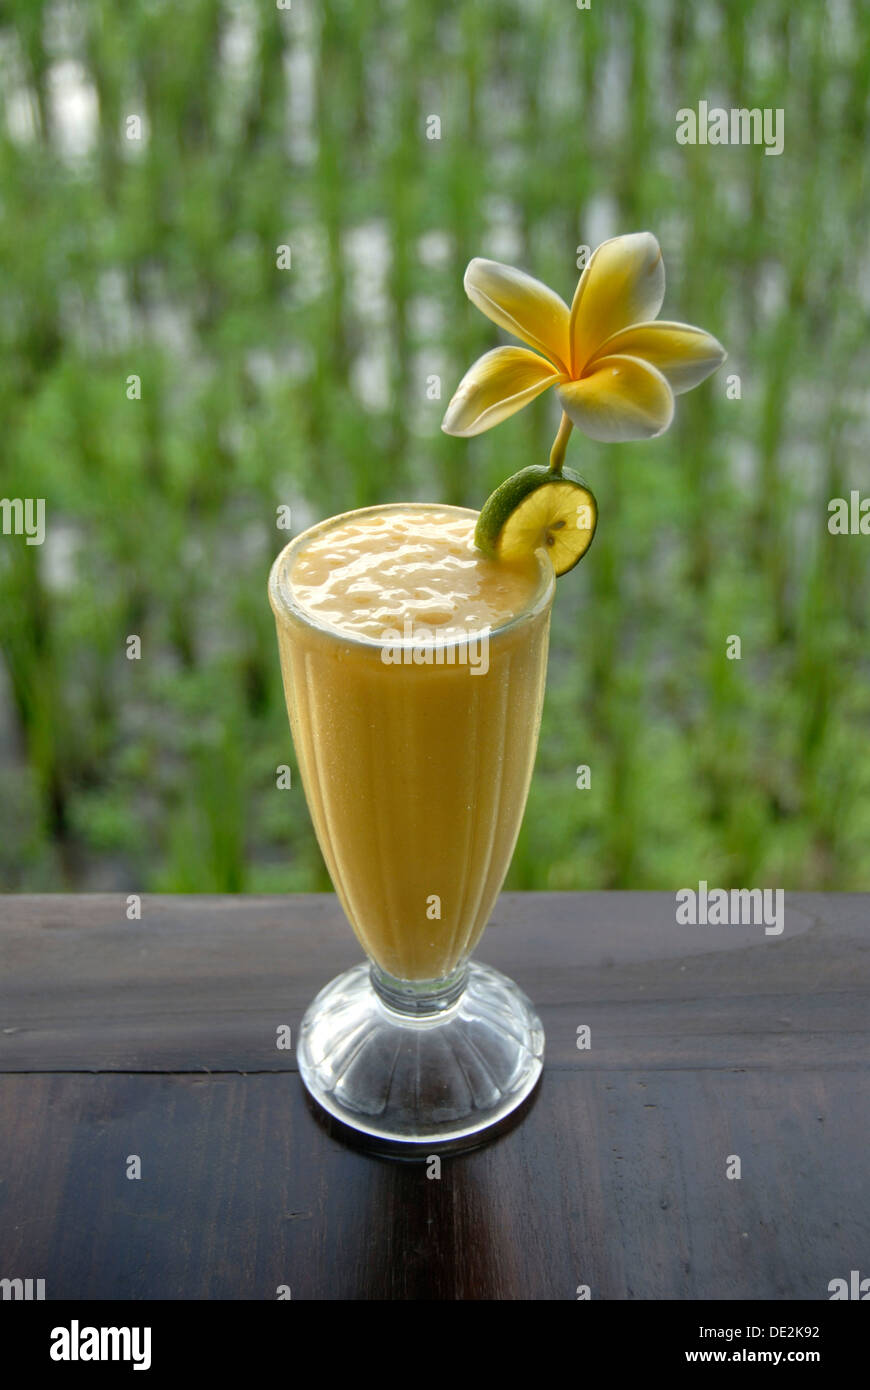 Soft drink, mango smoothie in a glass decorated with flowers, in front of a rice field in Ubud, Bali, Indonesia, Southeast Asia Stock Photo